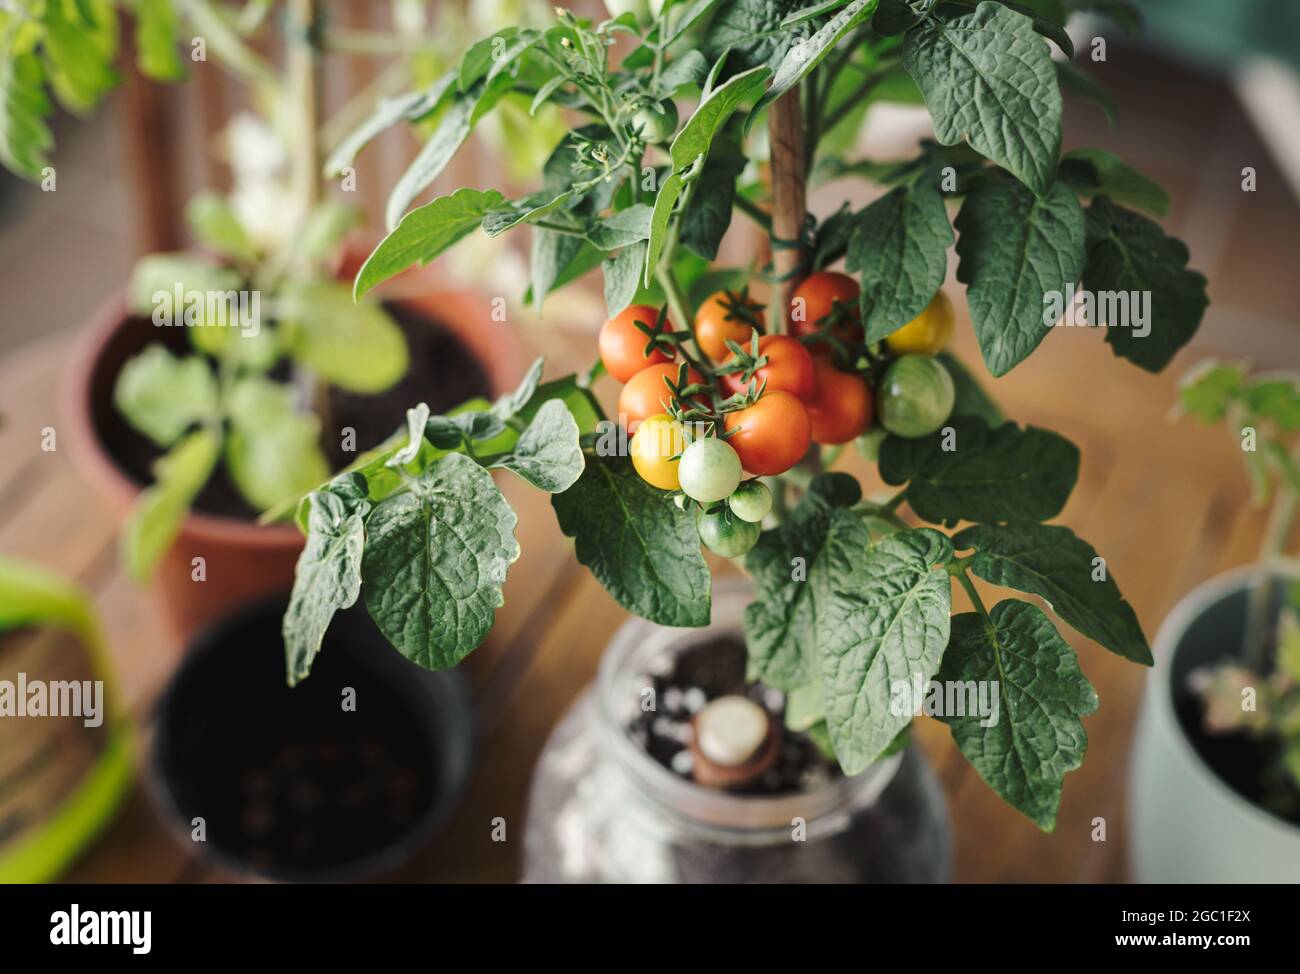 Home farming cherry tomato plant with small ripe tomatoes in a pot. Home organic garden and eco fresh vegetables concept Stock Photo